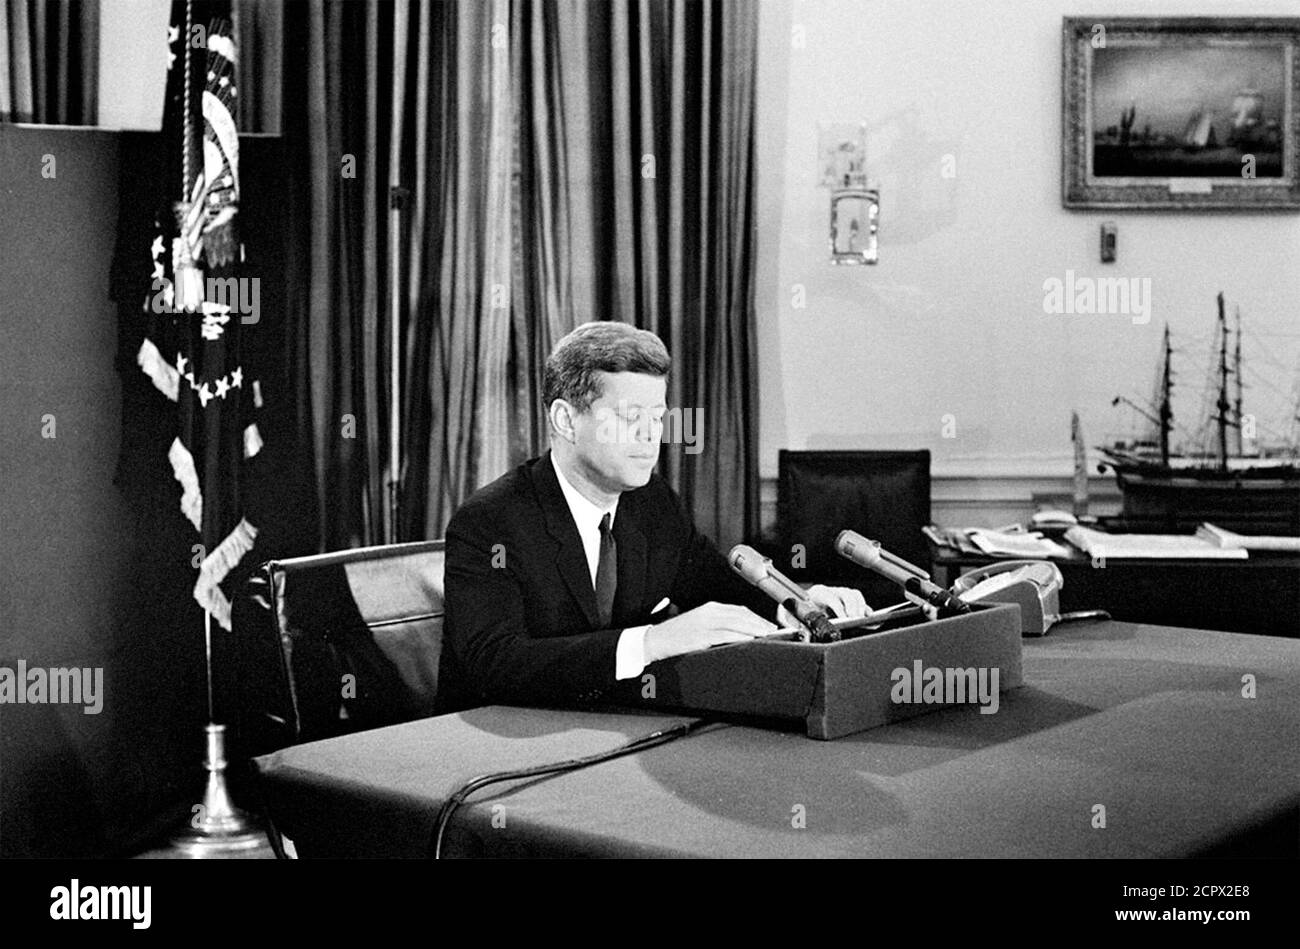 Cuban Missile Crisis. President John F Kennedy addresses the nation from the Oval Office on 22 October 1962 with regard to the threat from Soviet missiles in Cuba. Stock Photo